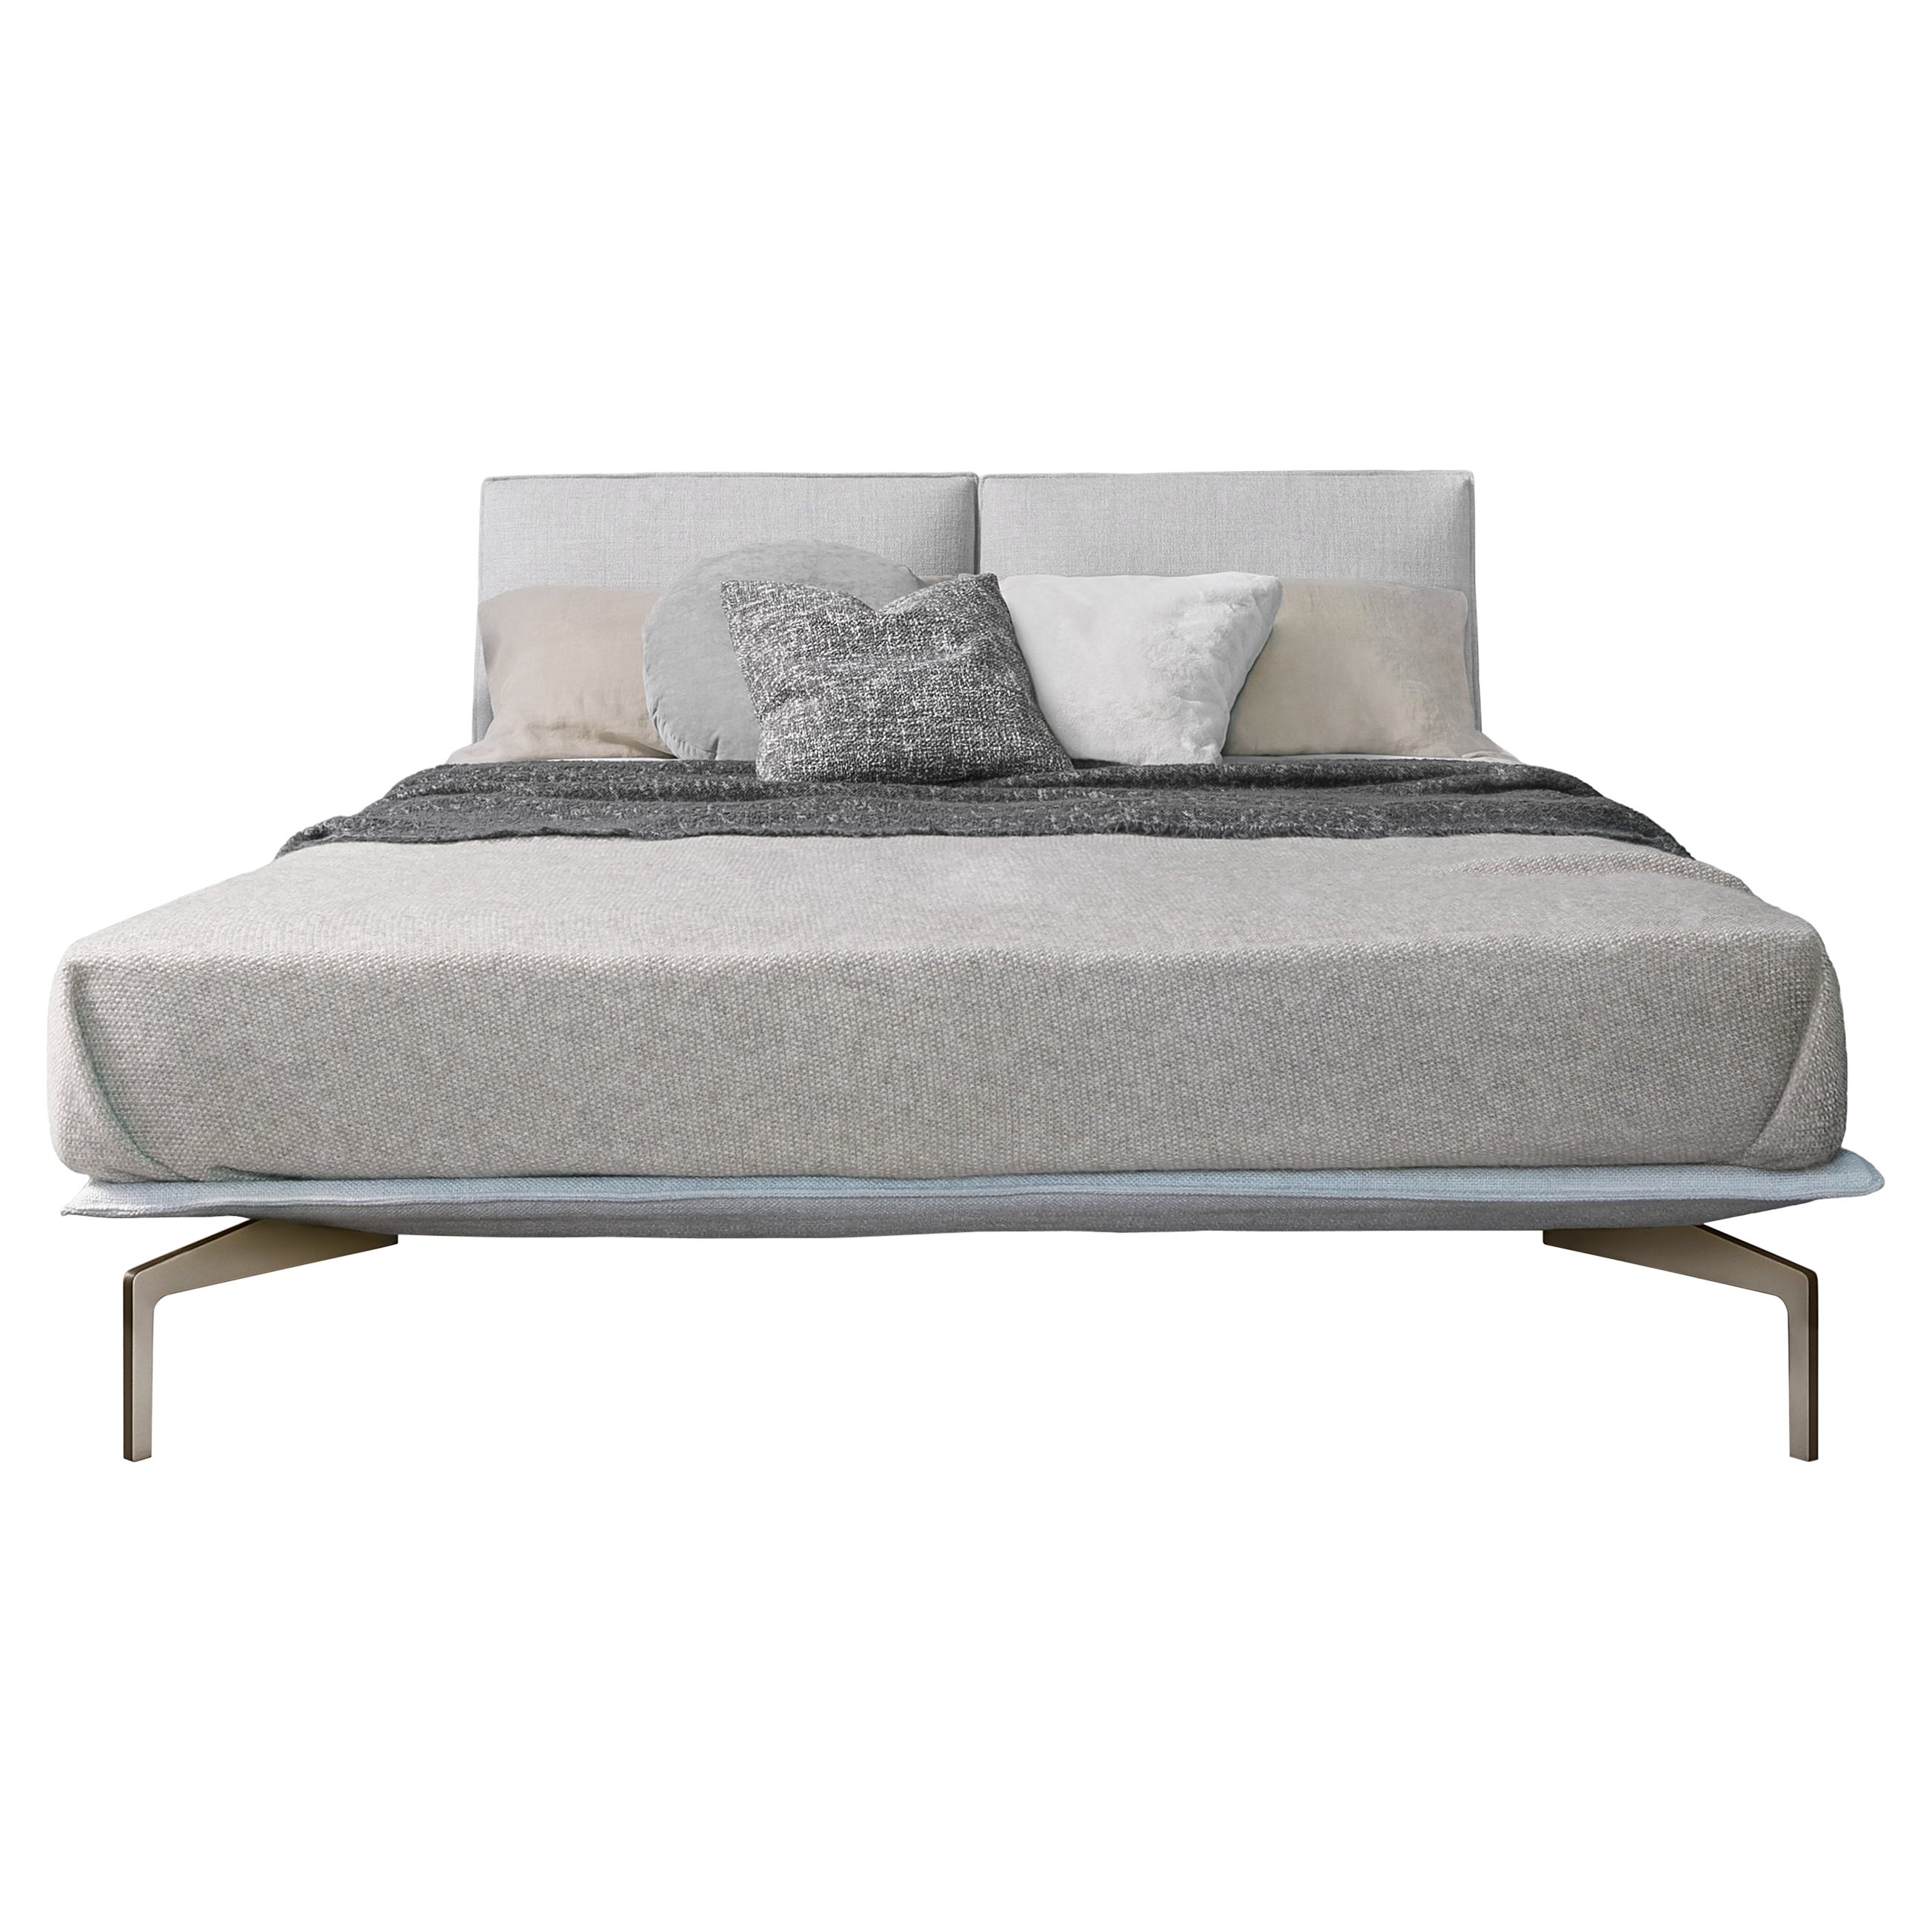 Letto Avant-Après Small Bed in AT192 Light Grey Upholstery by Sergio Bicego